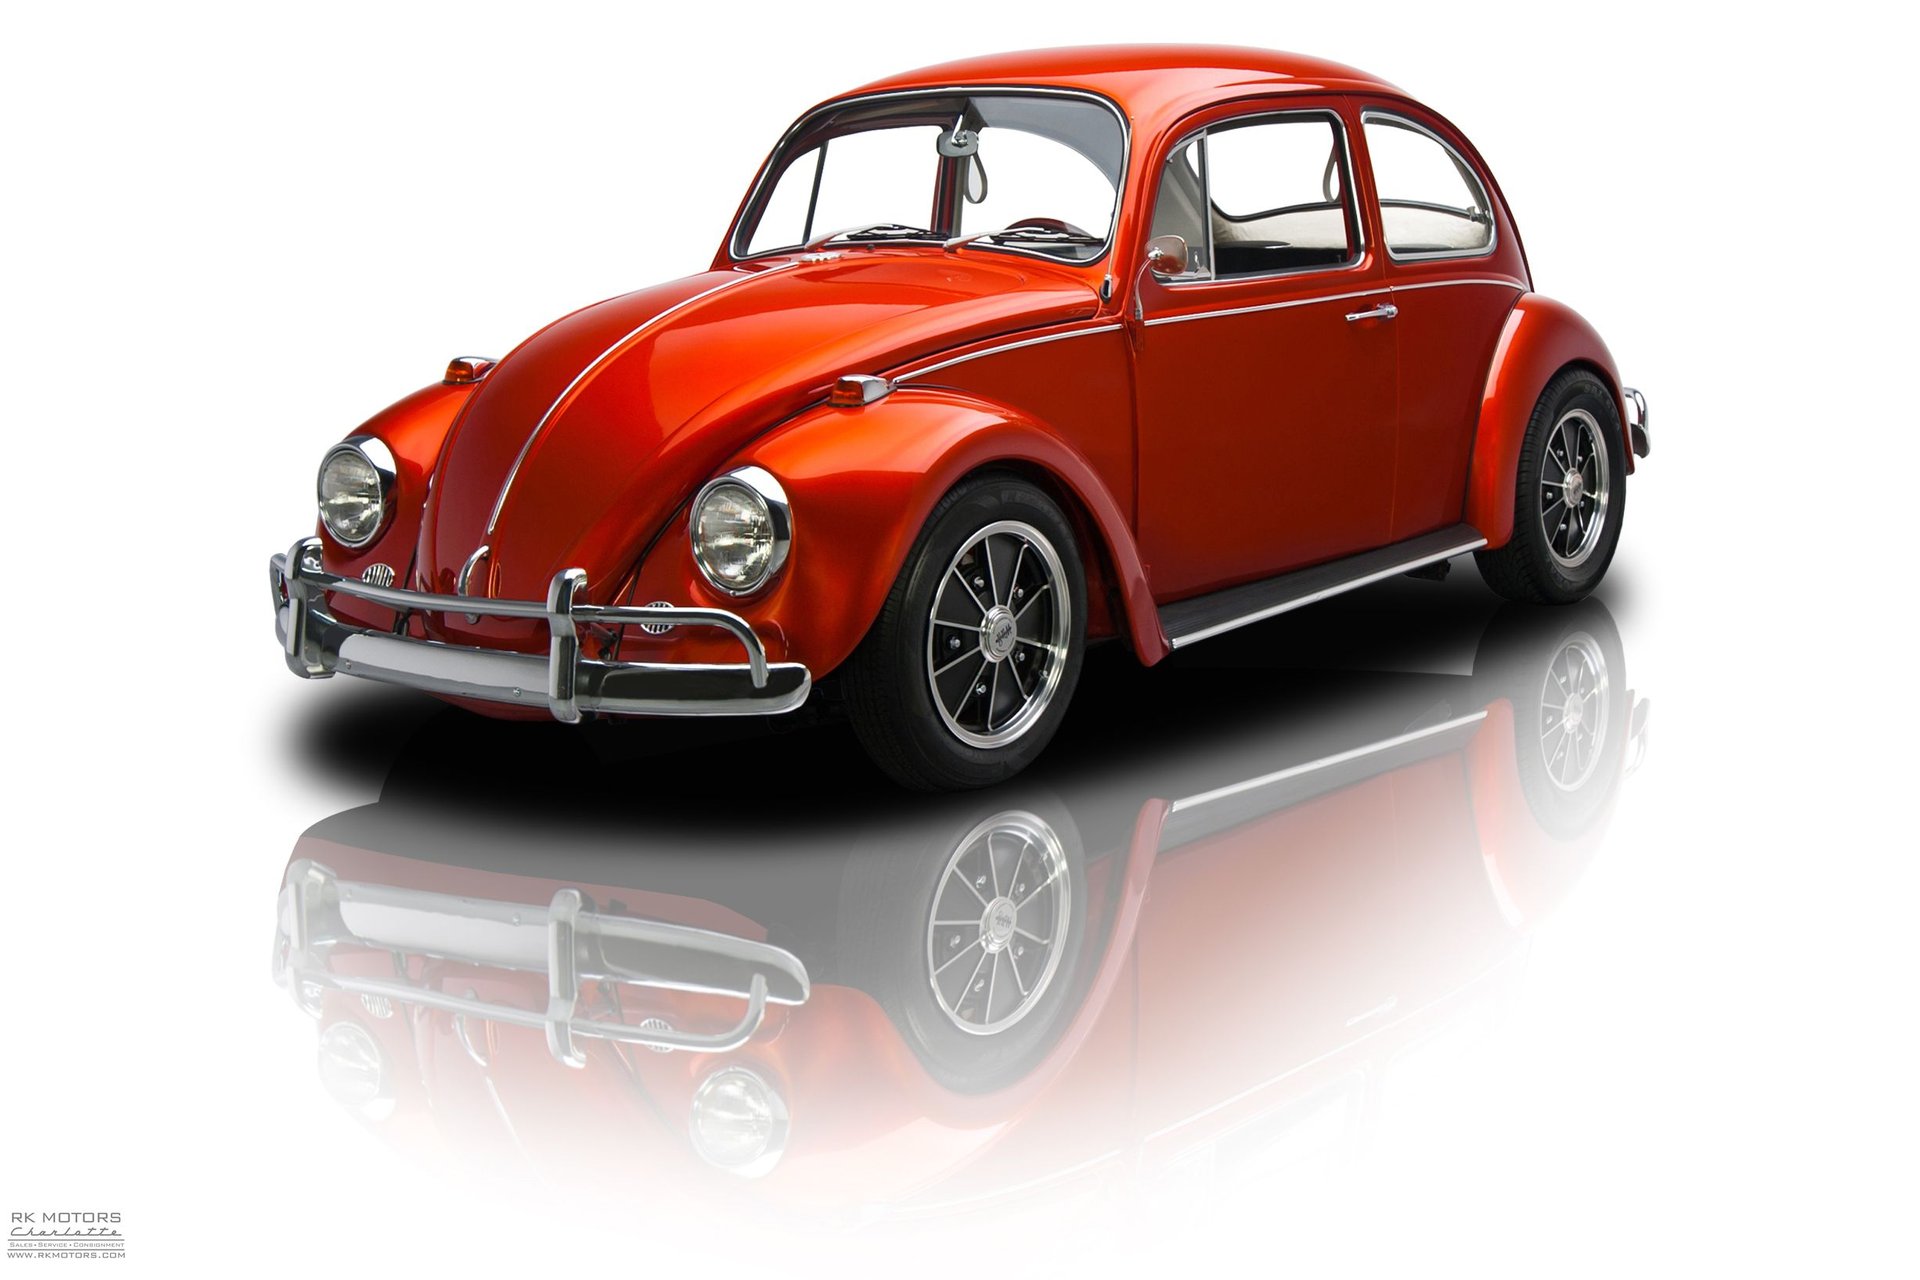 134107 1967 Volkswagen Beetle RK Motors Classic Cars and Muscle Cars for  Sale